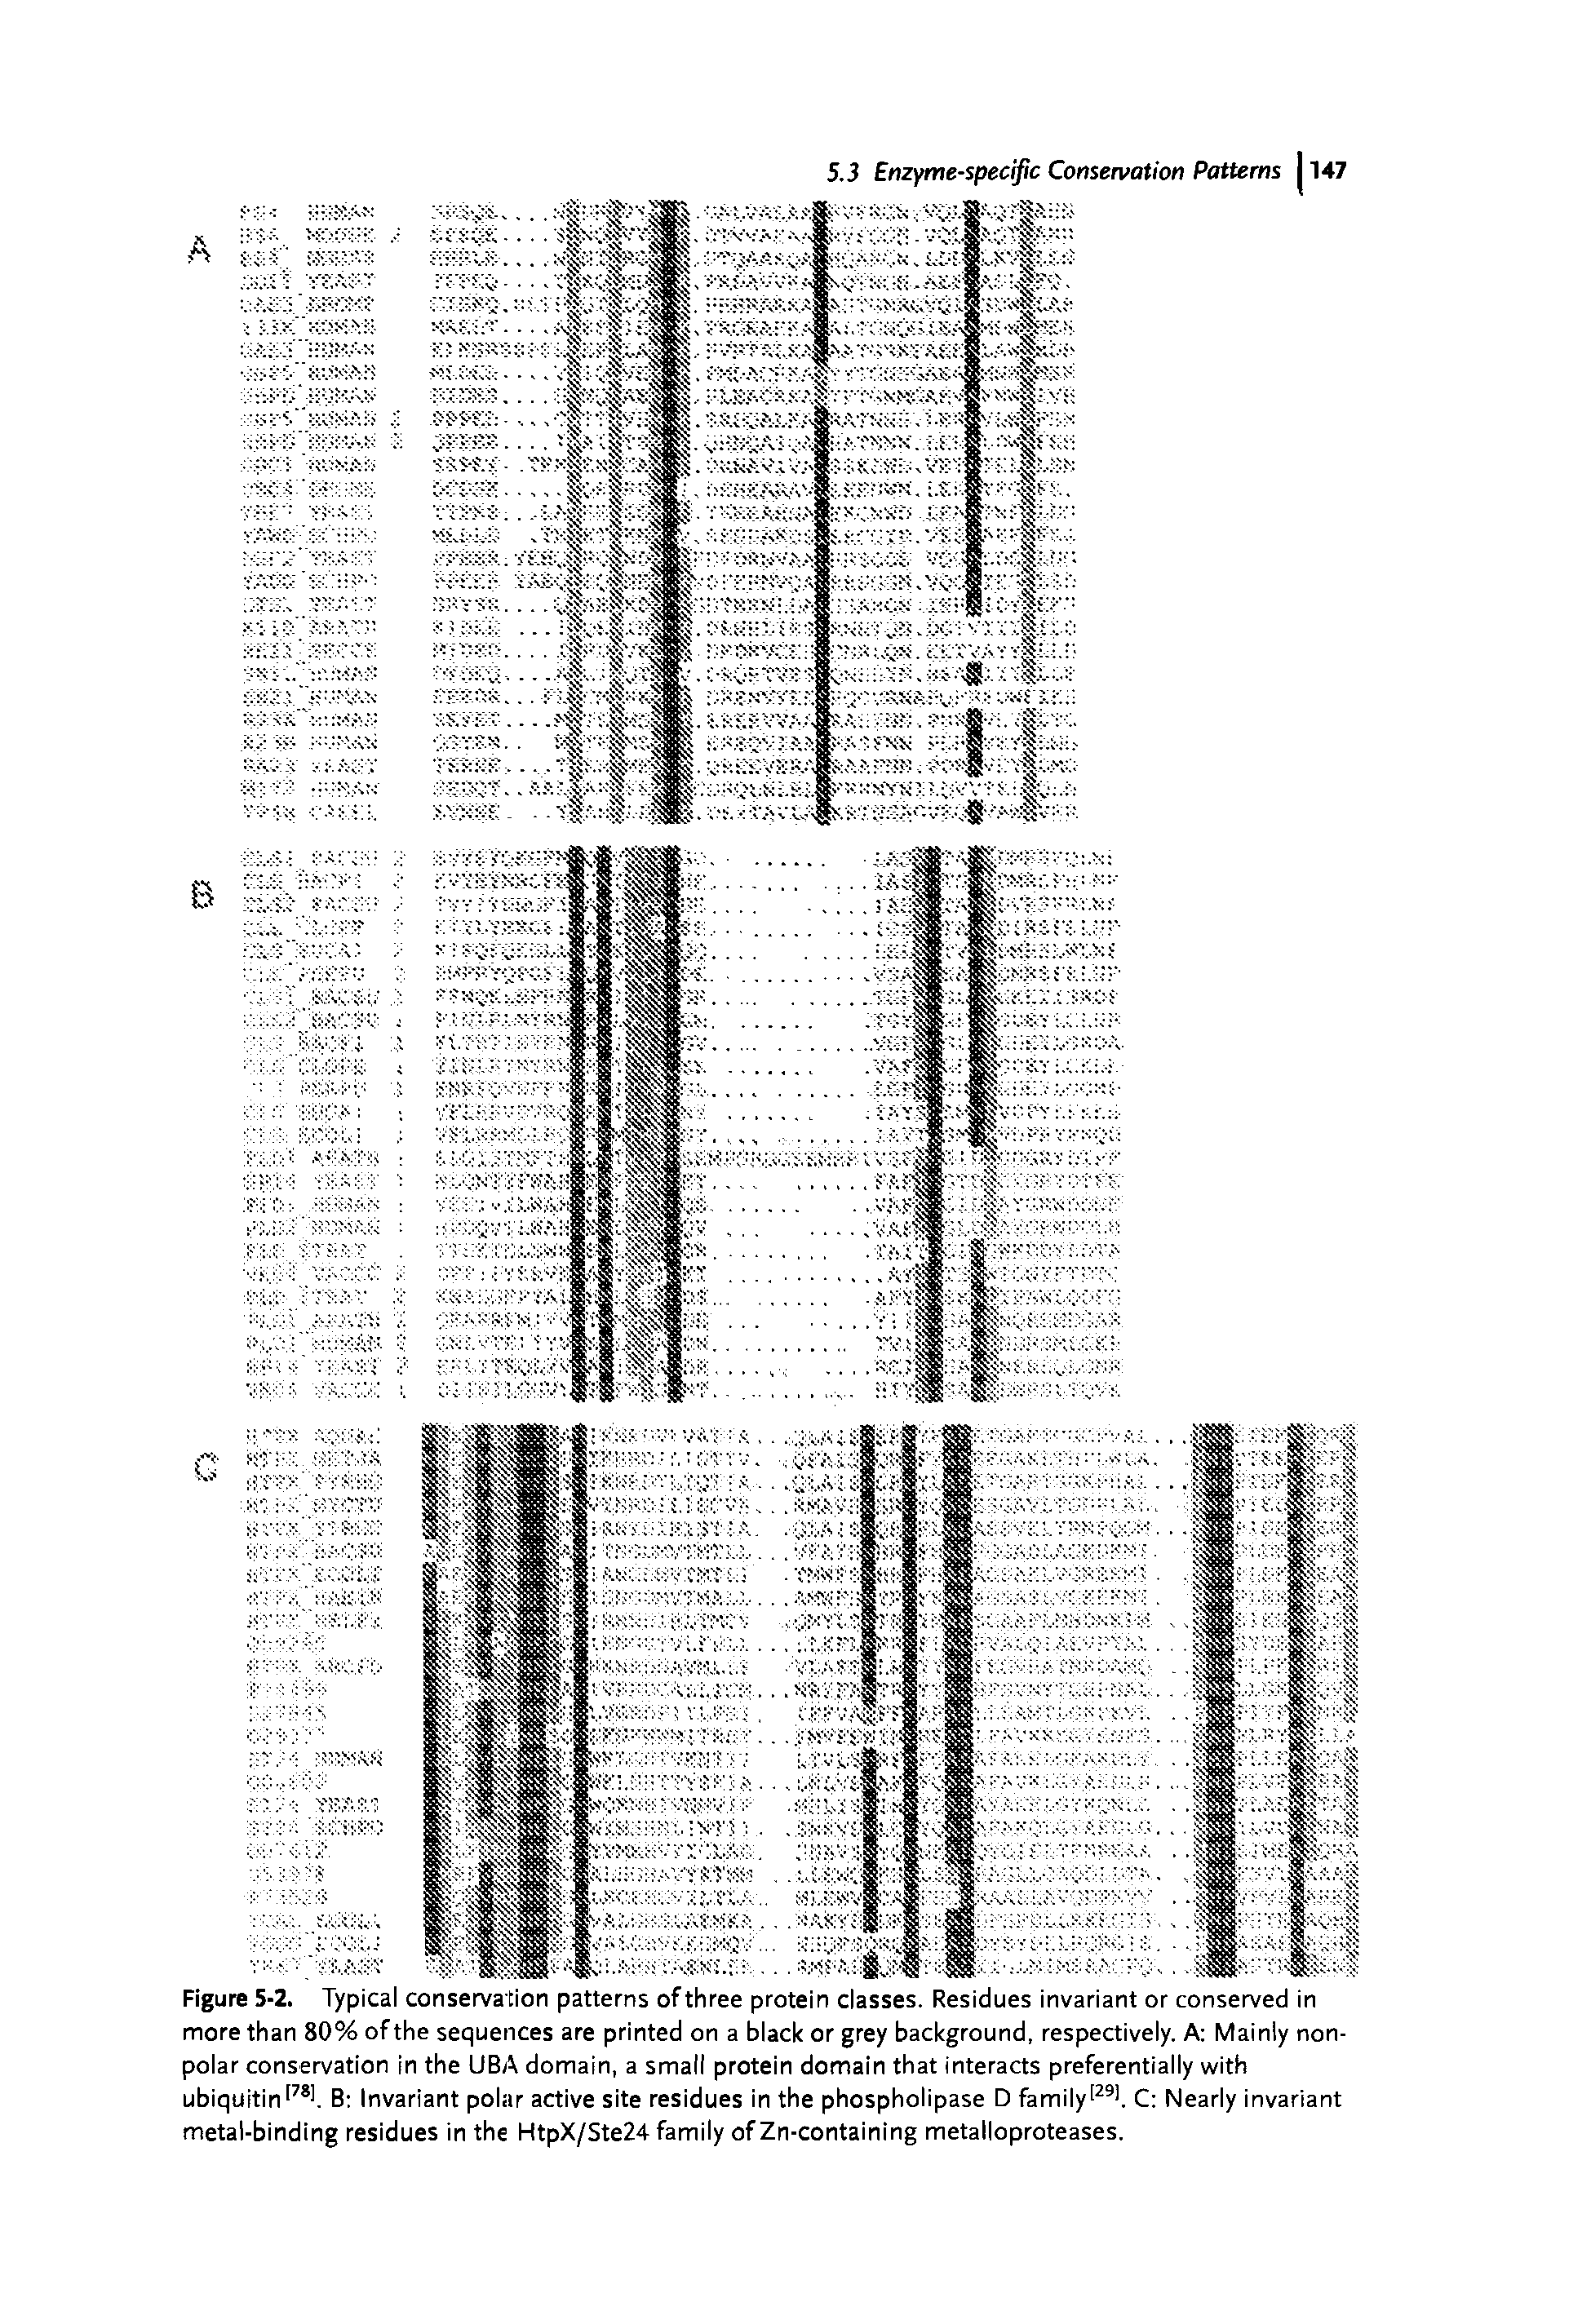 Figure 5-2. Typical conservation patterns of three protein classes. Residues invariant or conserved in more than 80% ofthe sequences are printed on a black or grey background, respectively. A Mainly nonpolar conservation in the UBA domain, a small protein domain that interacts preferentially with ubiquitin1781. B Invariant polar active site residues in the phospholipase D family1291. C Nearly invariant metal-binding residues in the HtpX/Ste24 family of Zn-containing metalloproteases.